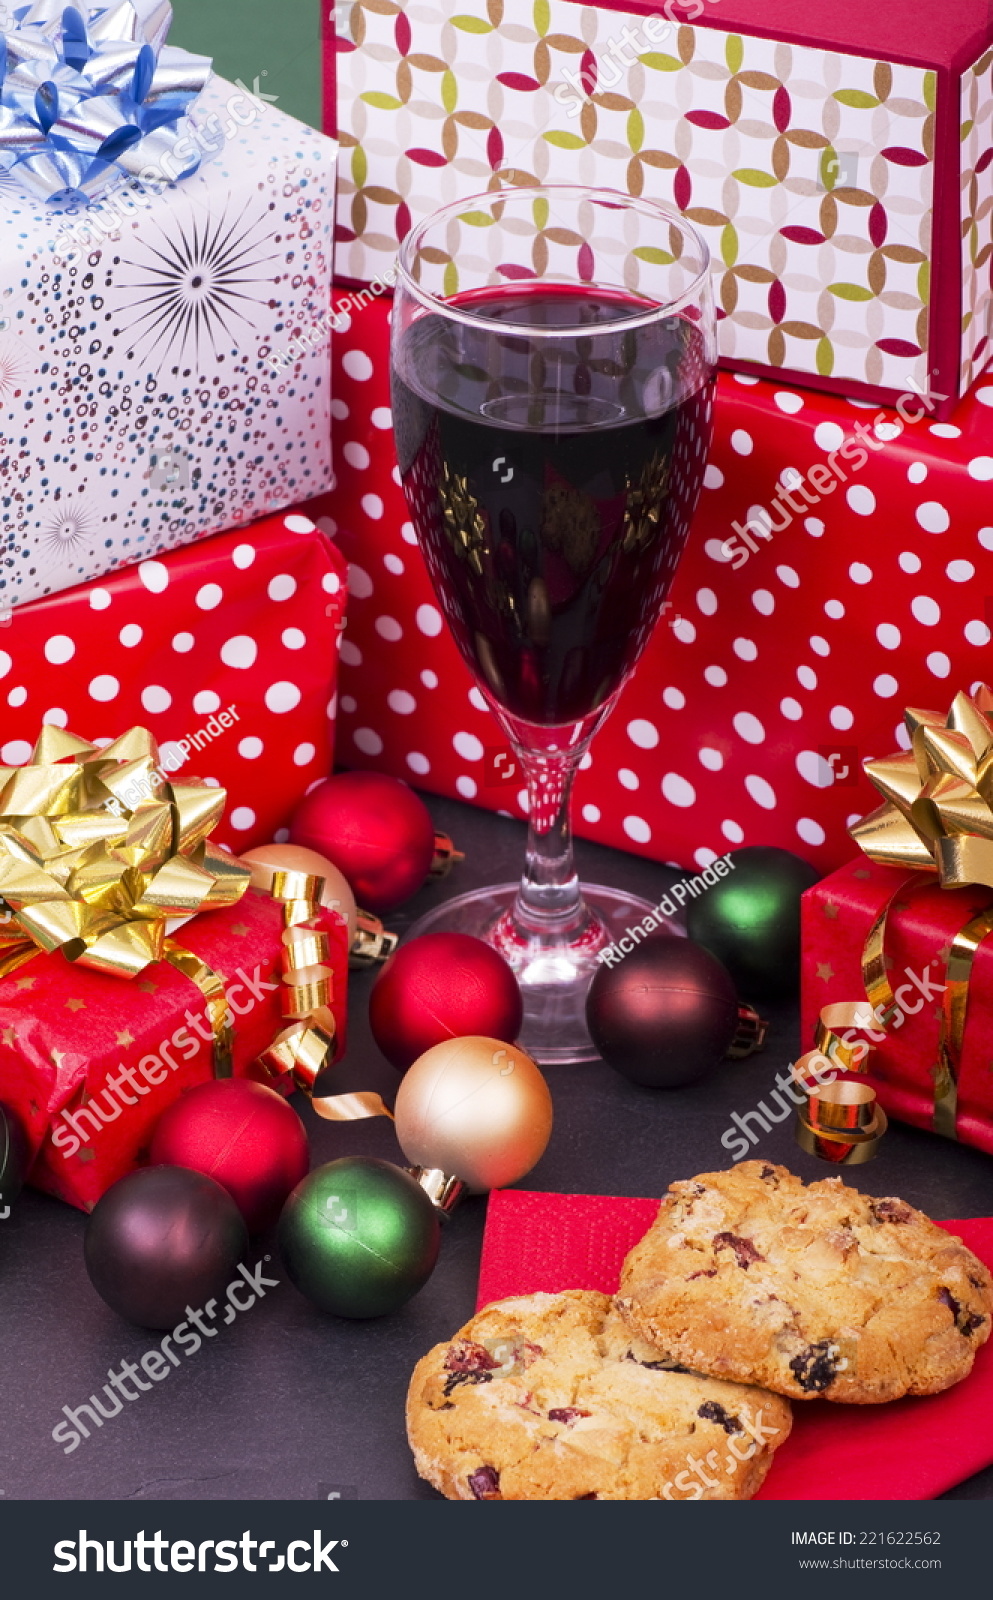 Christmas Cookies Red Wine Presents Selection Stock Photo Edit Now 221622562